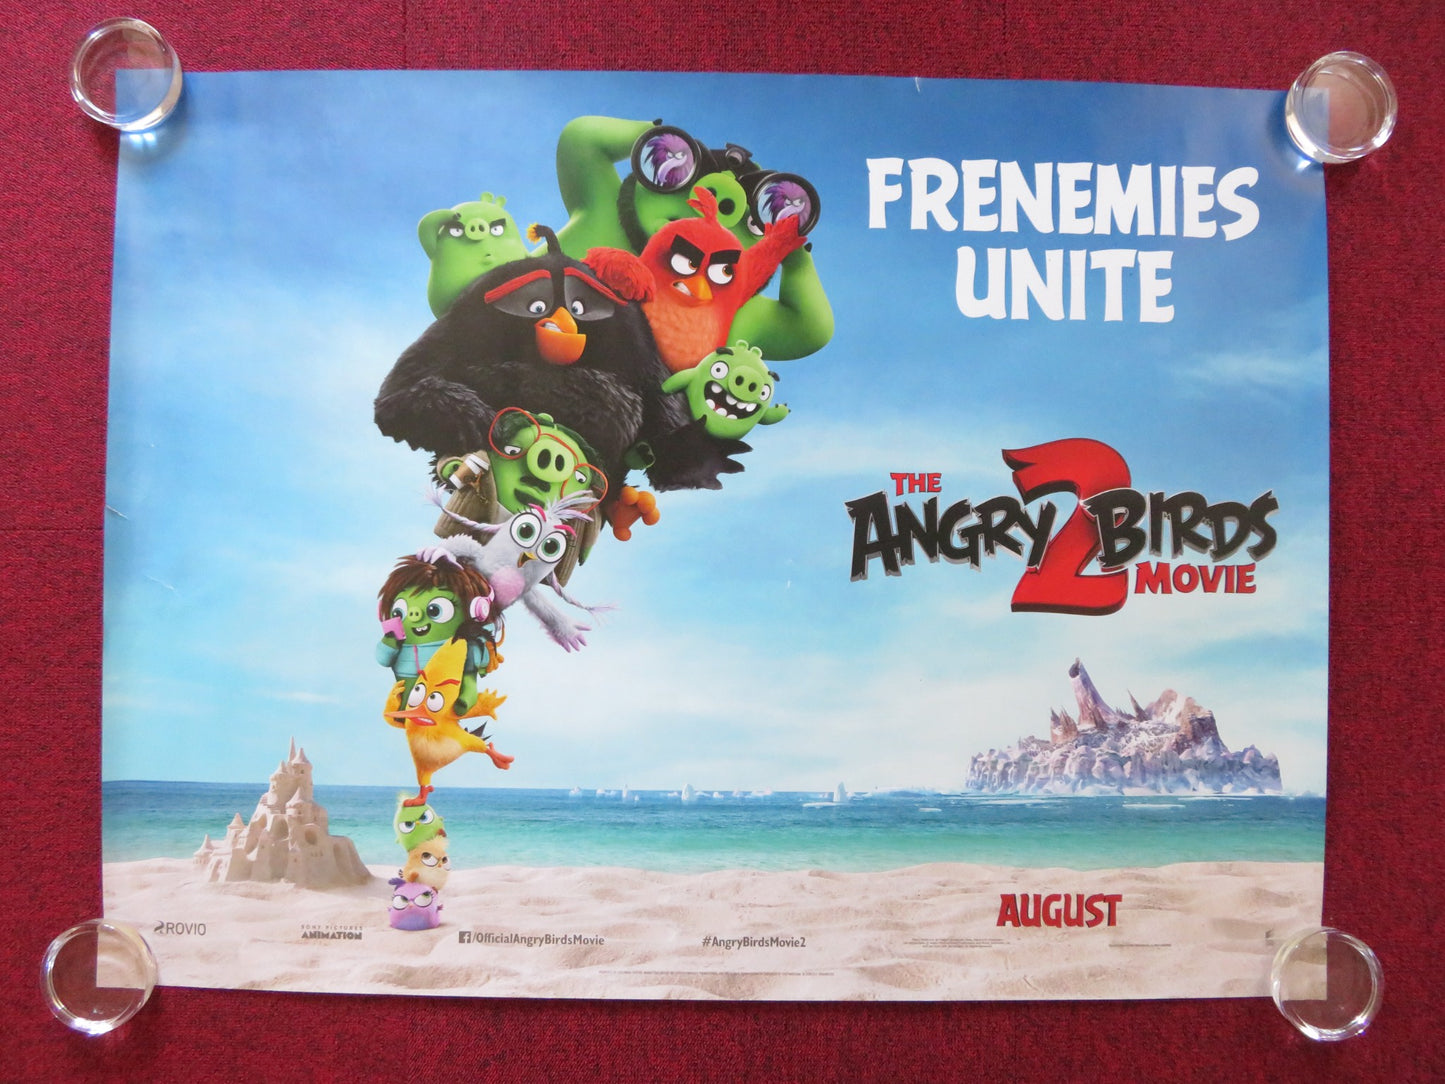 THE ANGRY BIRDS MOVIE 2 UK QUAD (30"x 40") ROLLED POSTER JASON SUDEIKIS 2019